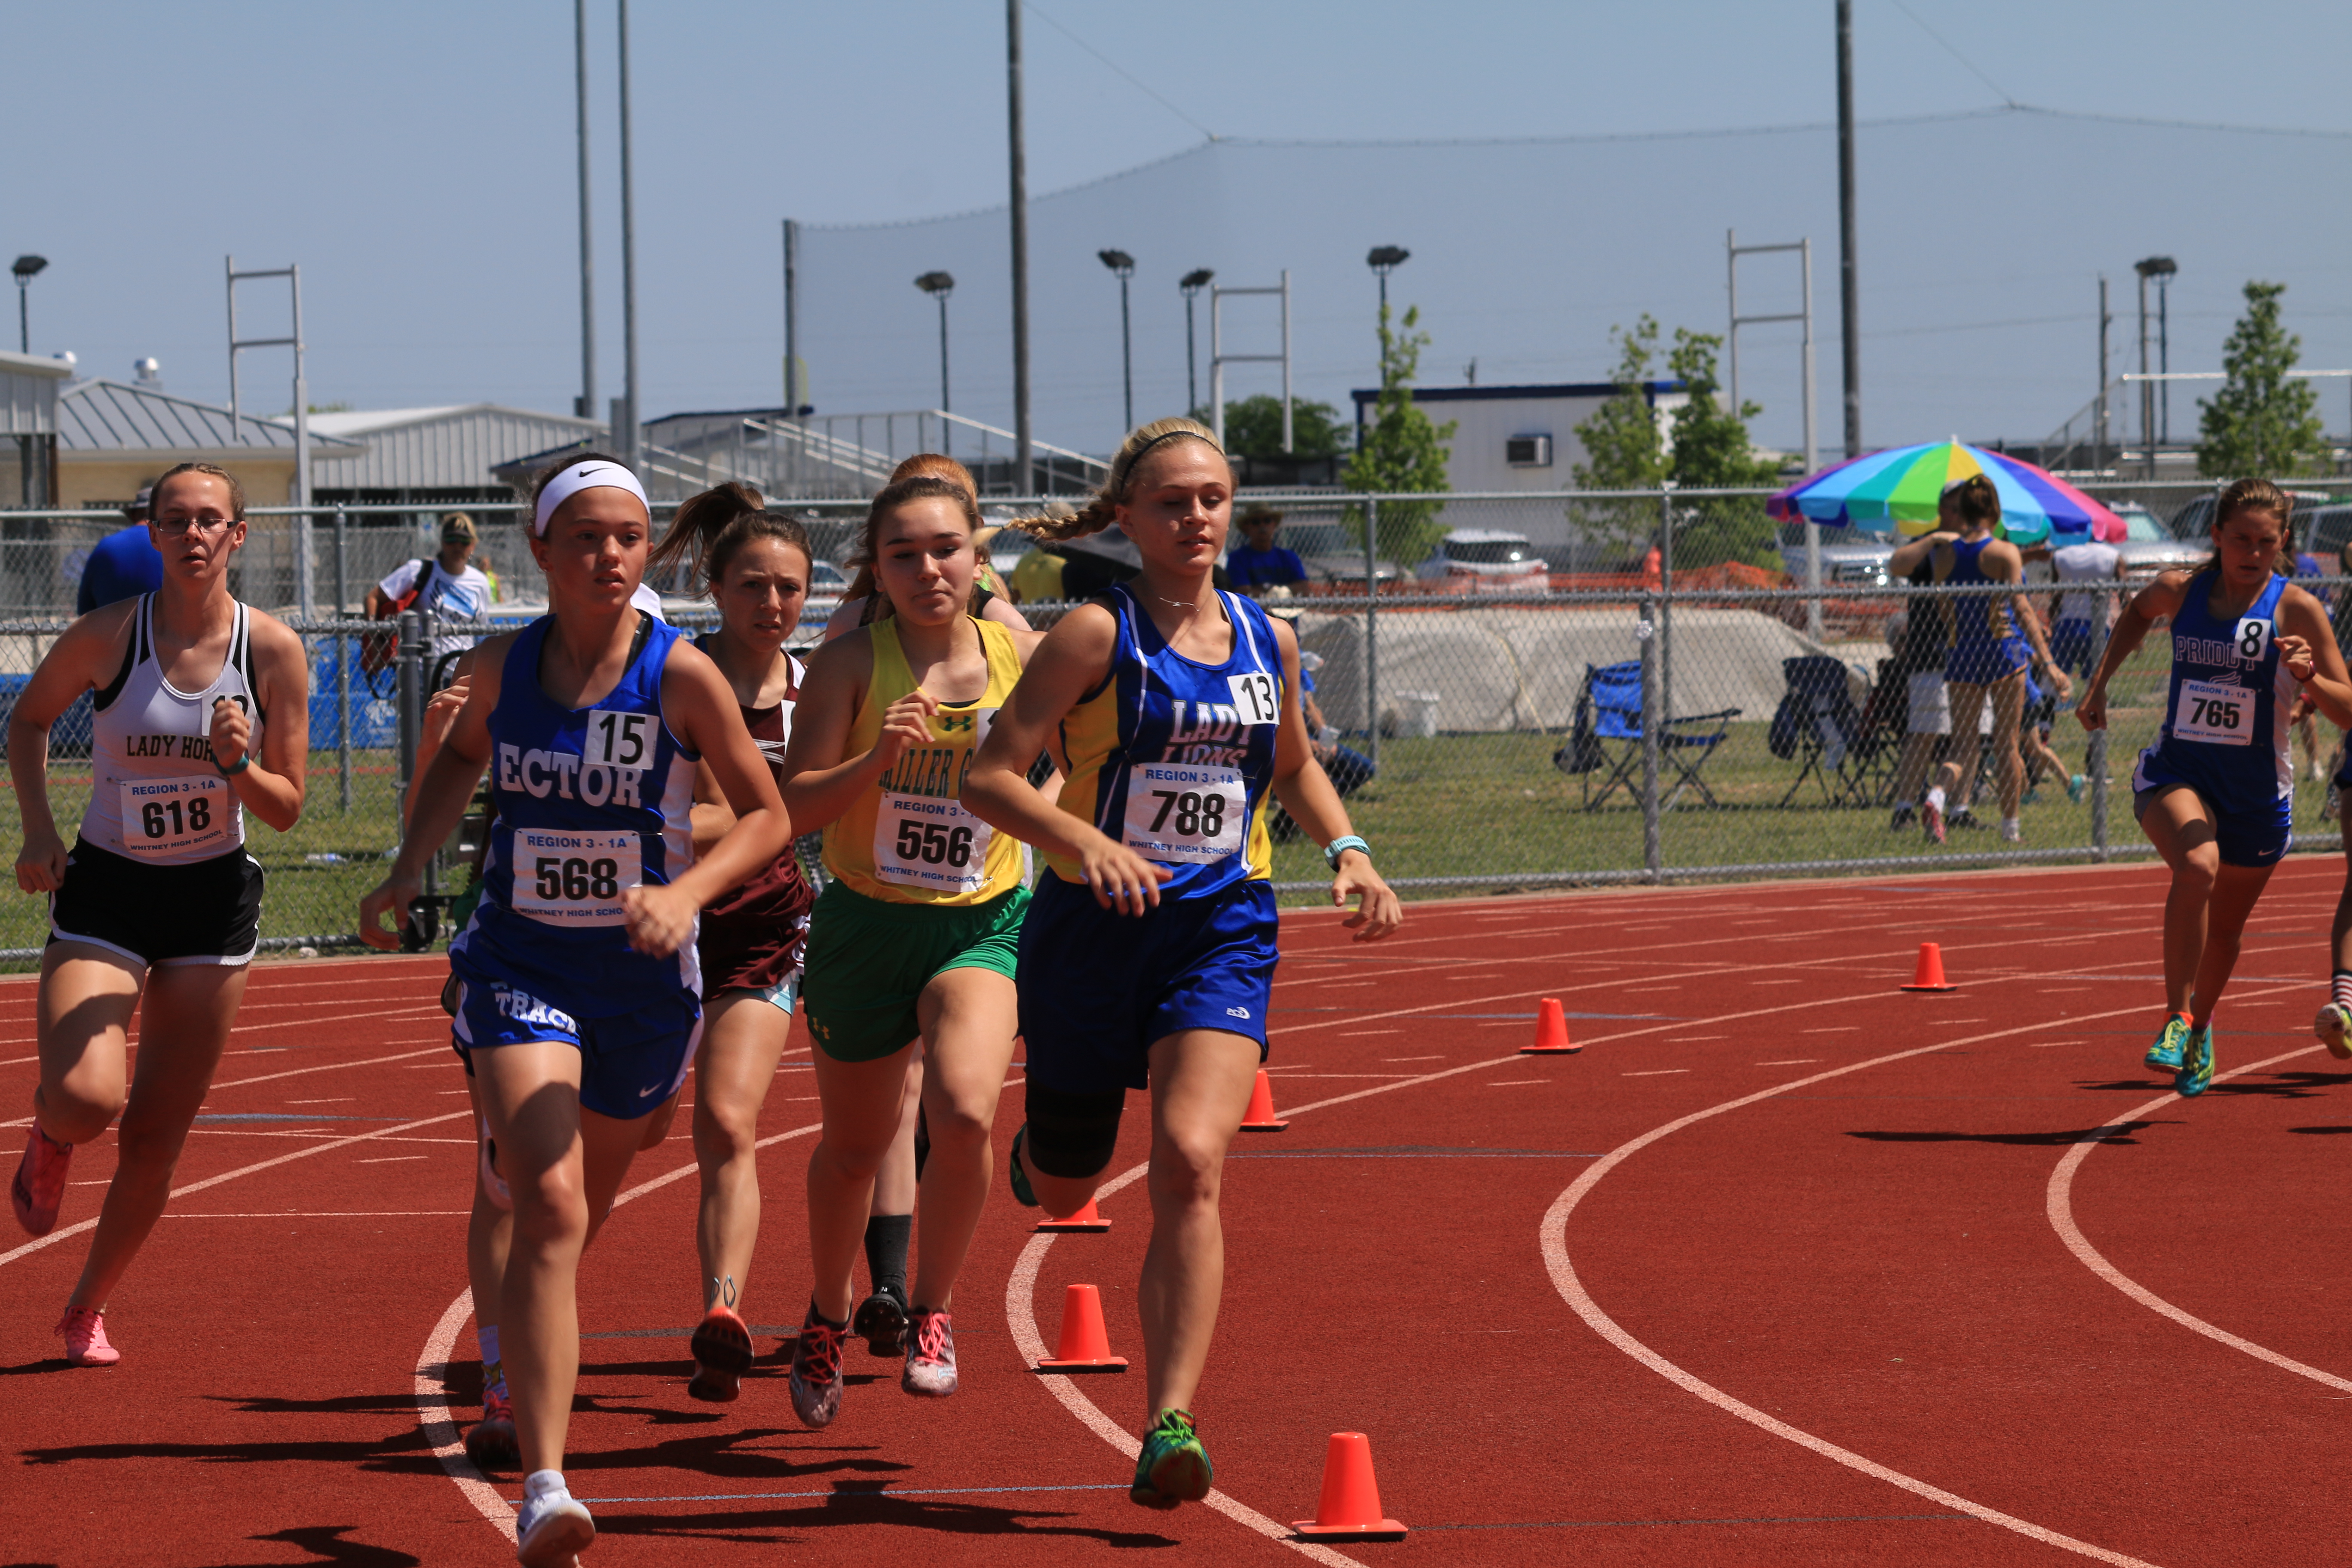 Miller Grove and Saltillo Track Athletes Perform Well at State Track Meet. Jorja Bessonett of Miller Grove Wins 3200m State Title.